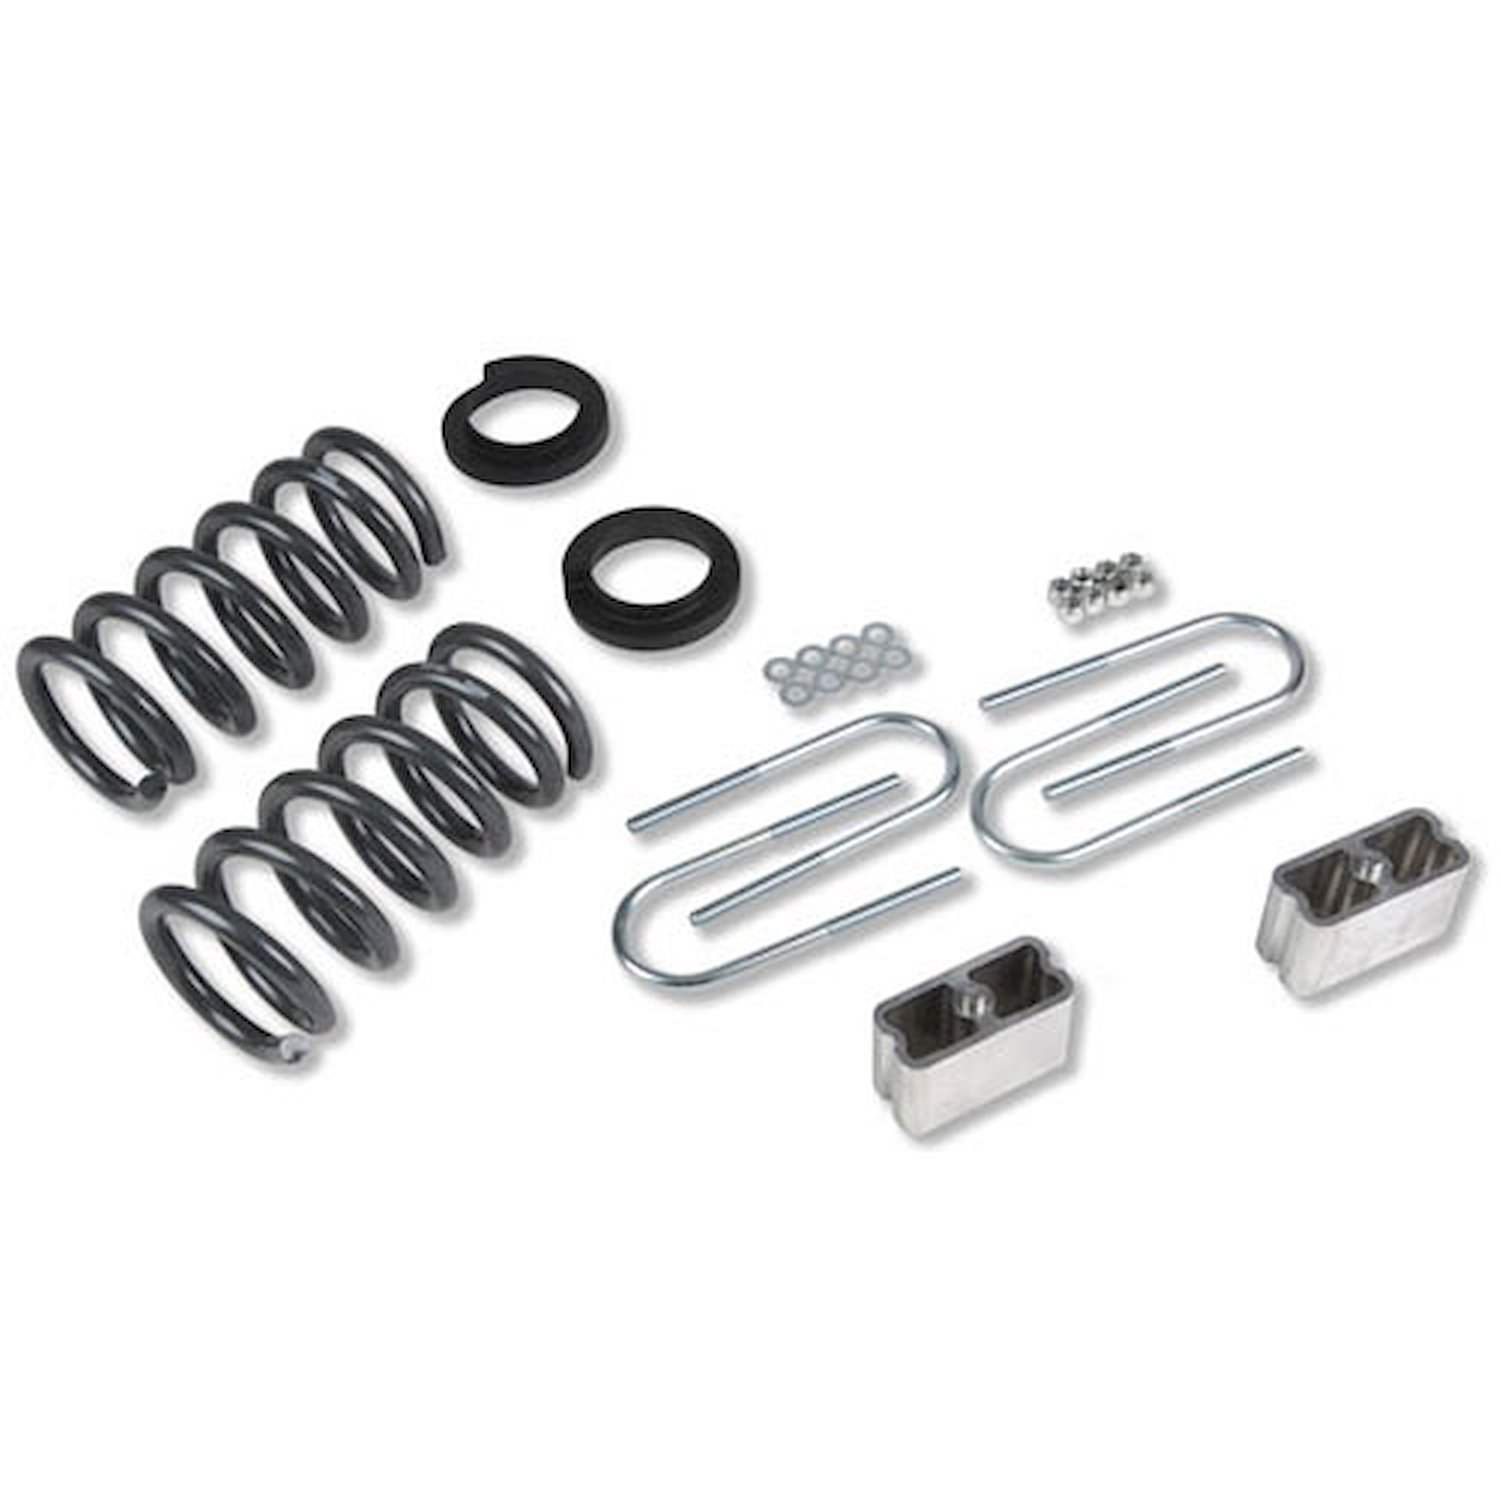 Complete Lowering Kit for 1994-2004 Chevy S10/GMC S15 Standard Cab